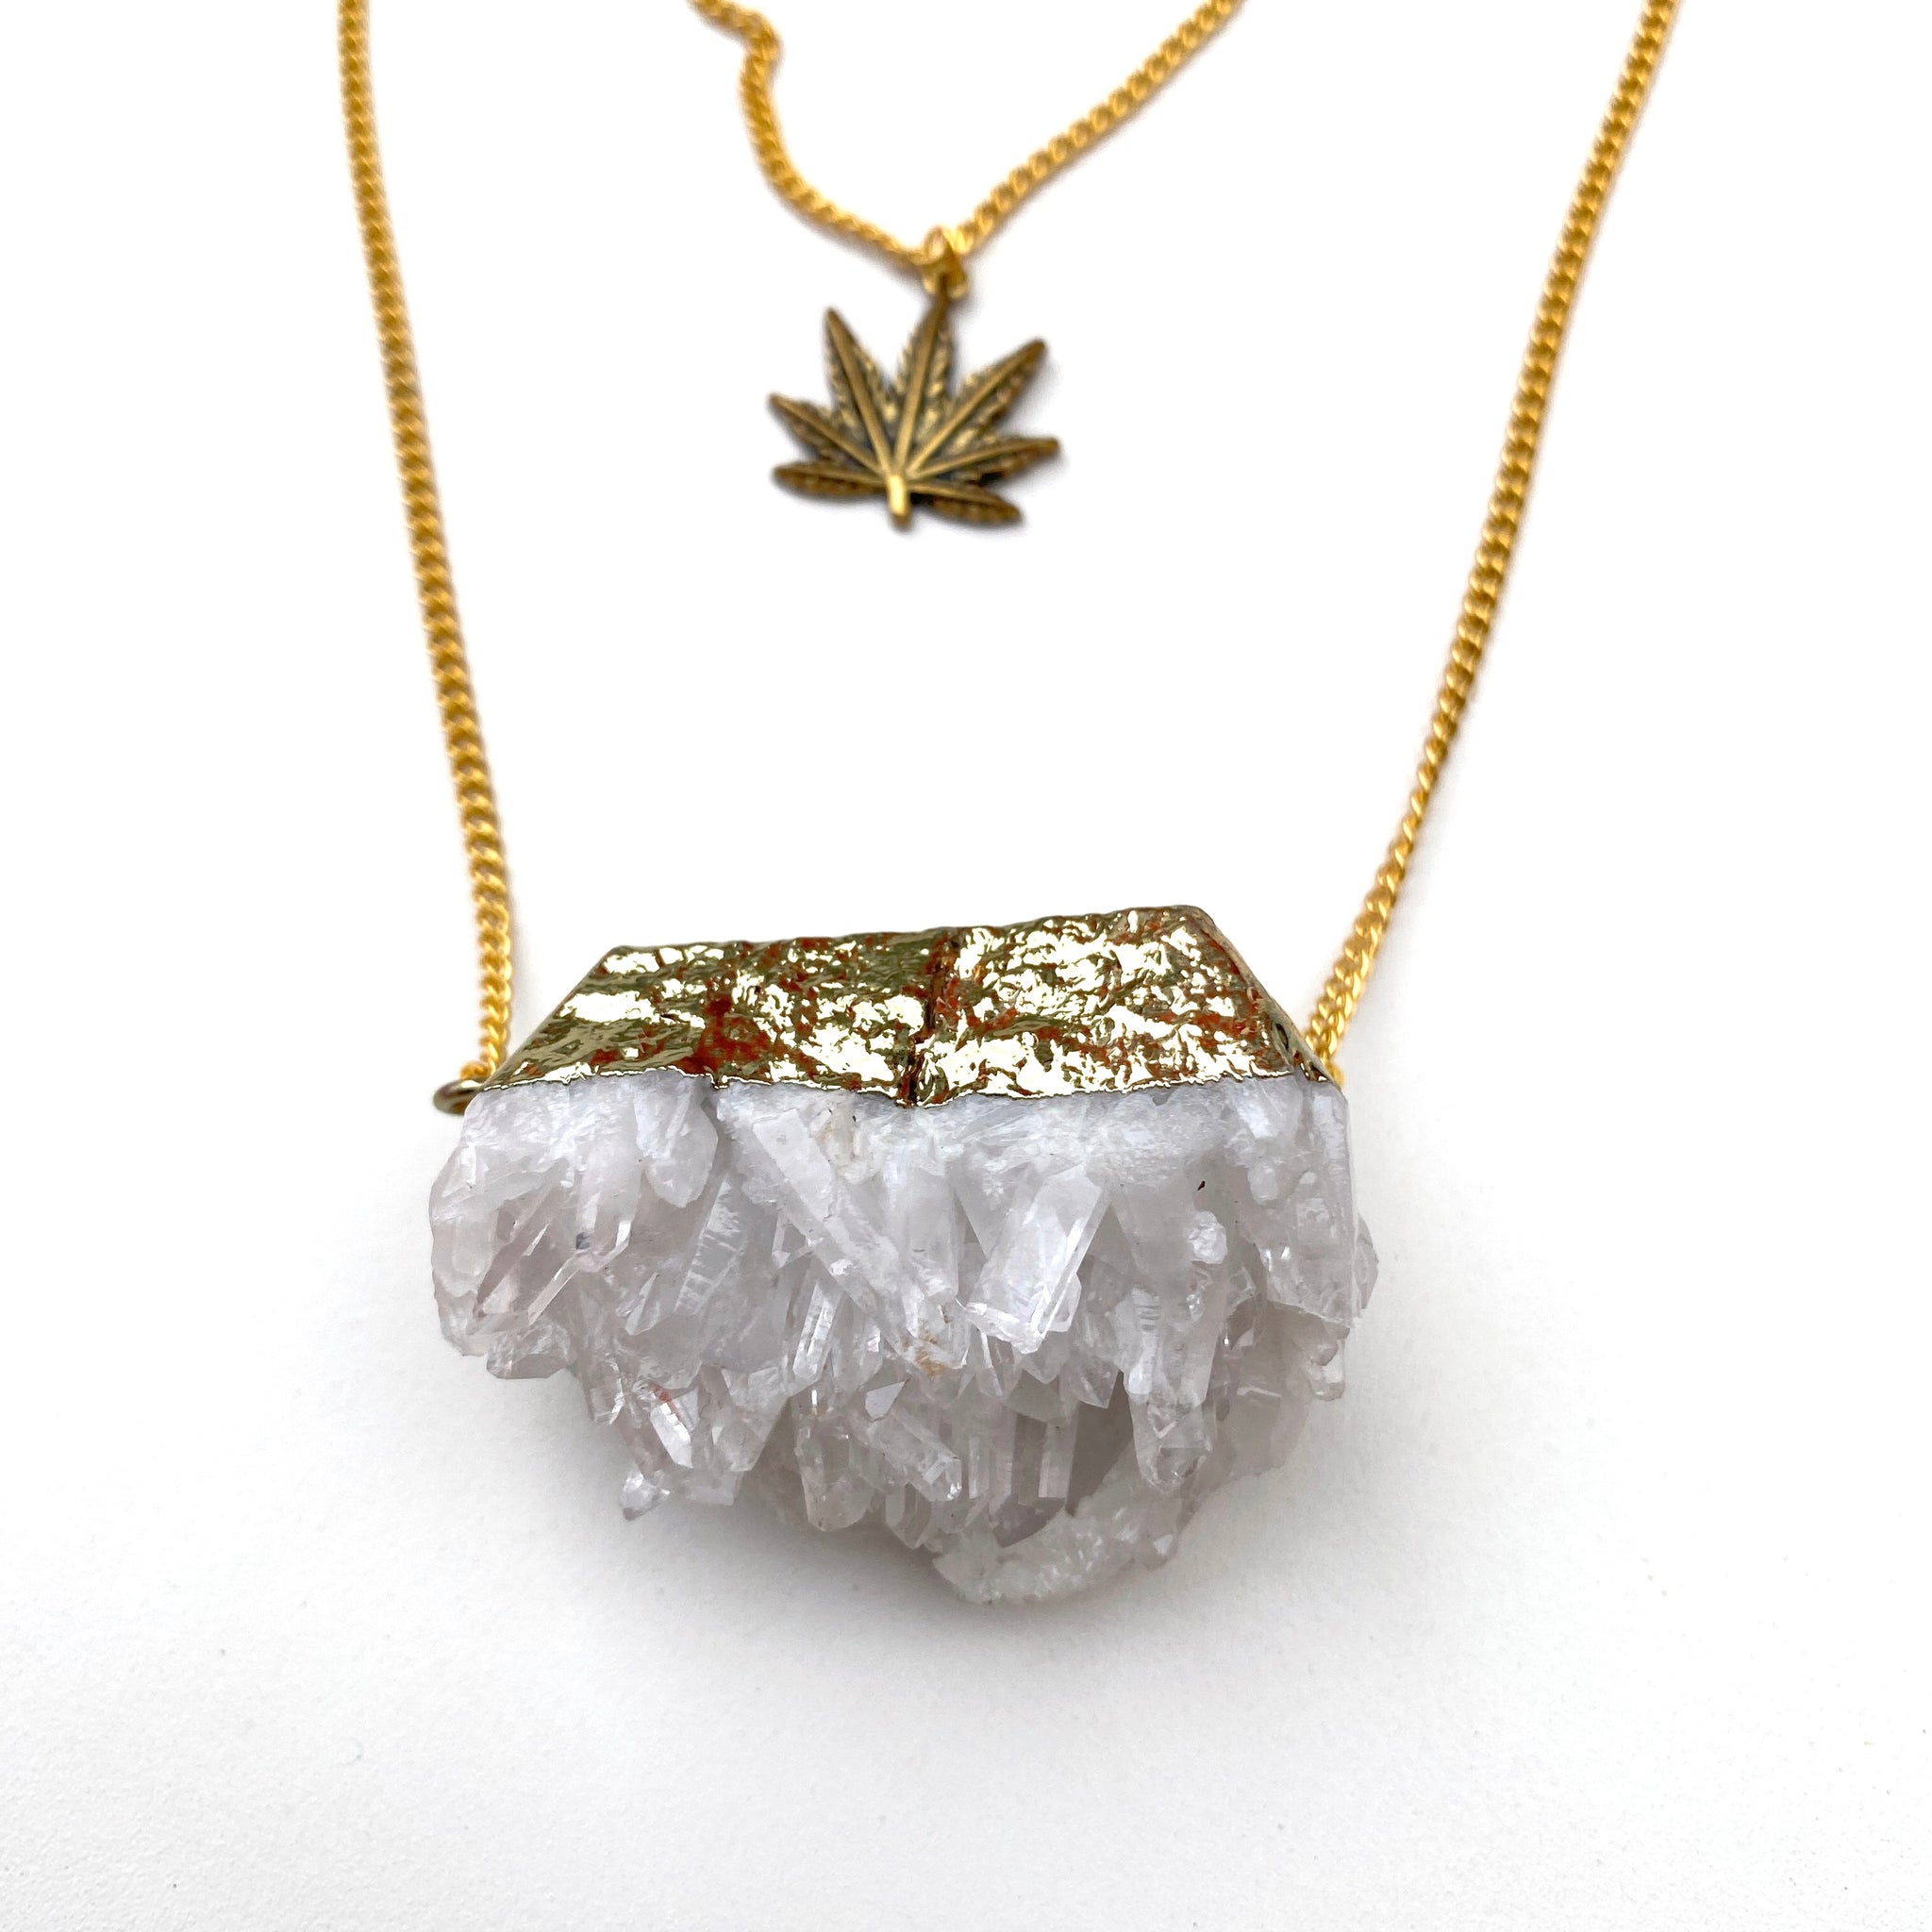 Crystal Layered Weed Leaf Necklace - Gold